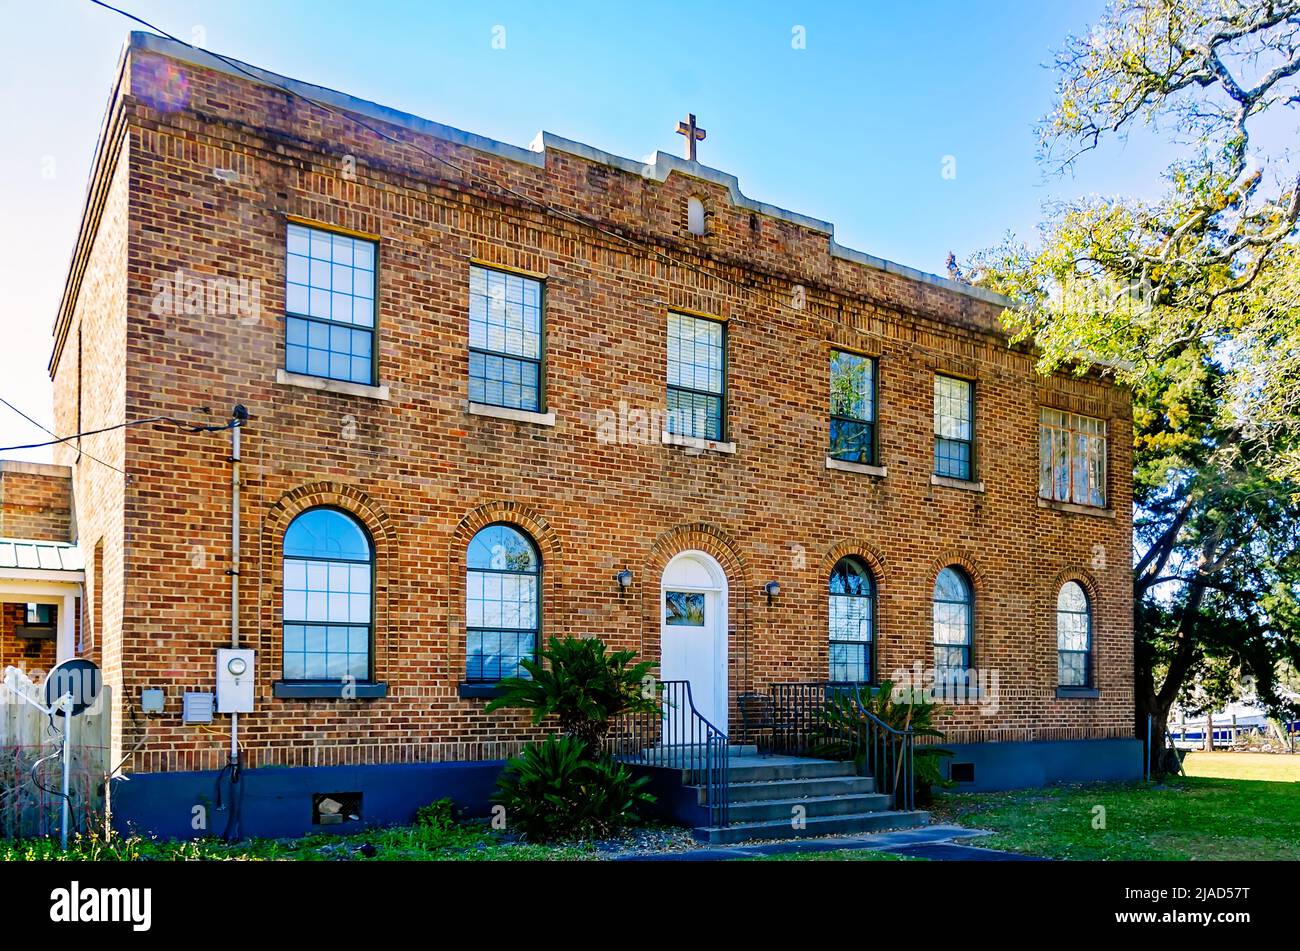 St. Margaret’s Catholic High School is pictured on the grounds of St. Margaret Catholic Church, March 1, 2022, in Bayou La Batre, Alabama. Stock Photo